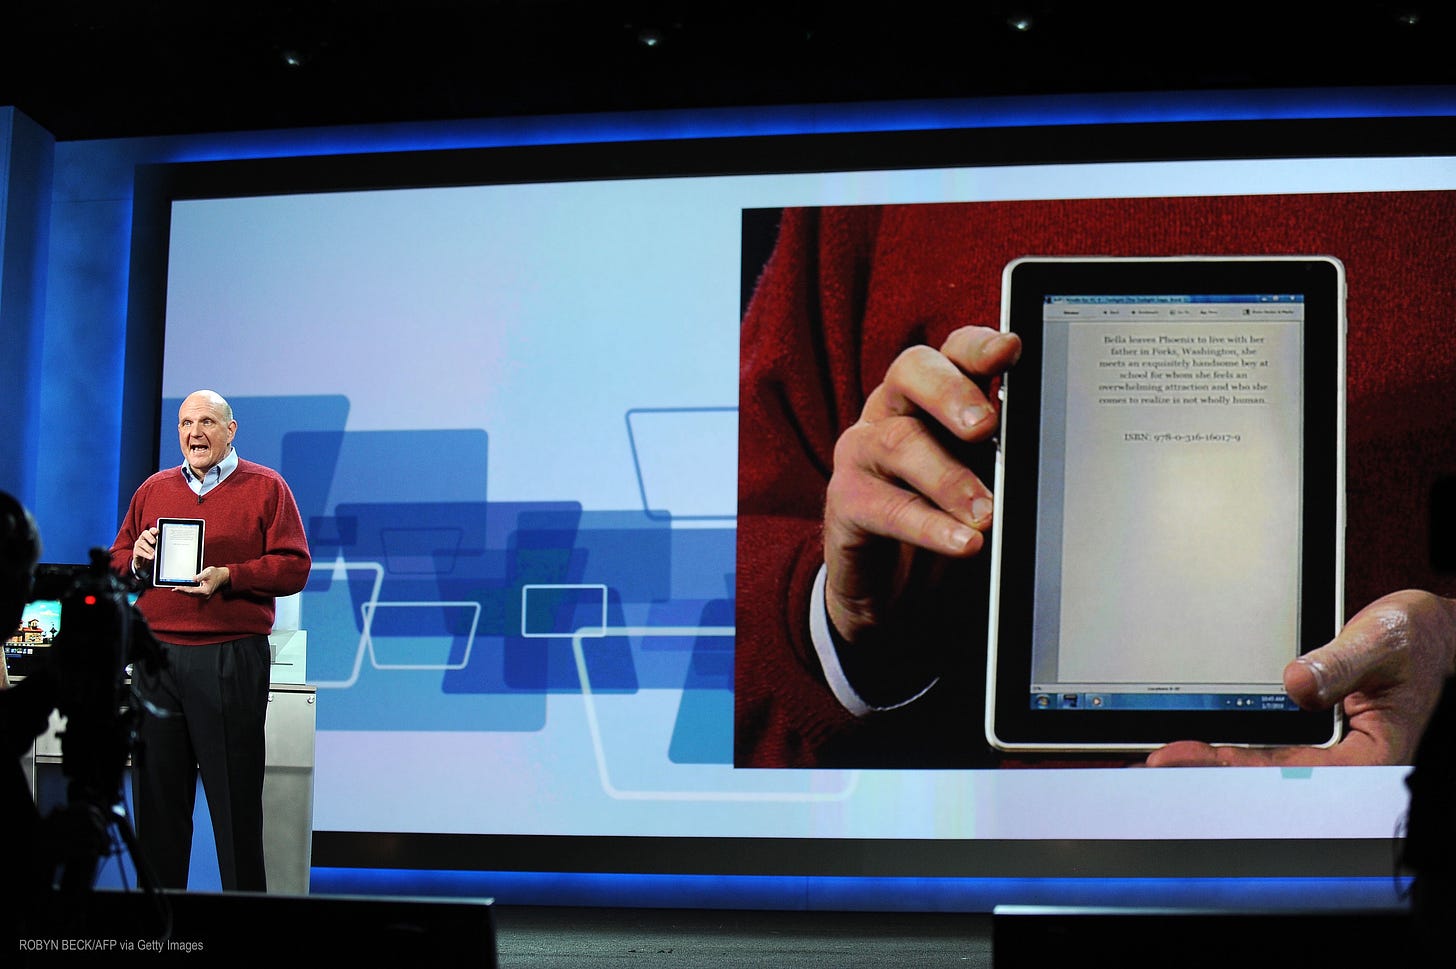 Steve Ballmer on stage showing the HP tablet running Windows 7. He is holding the tablet. Behind him is a giant screen showing a closeup. This is CES 2010.